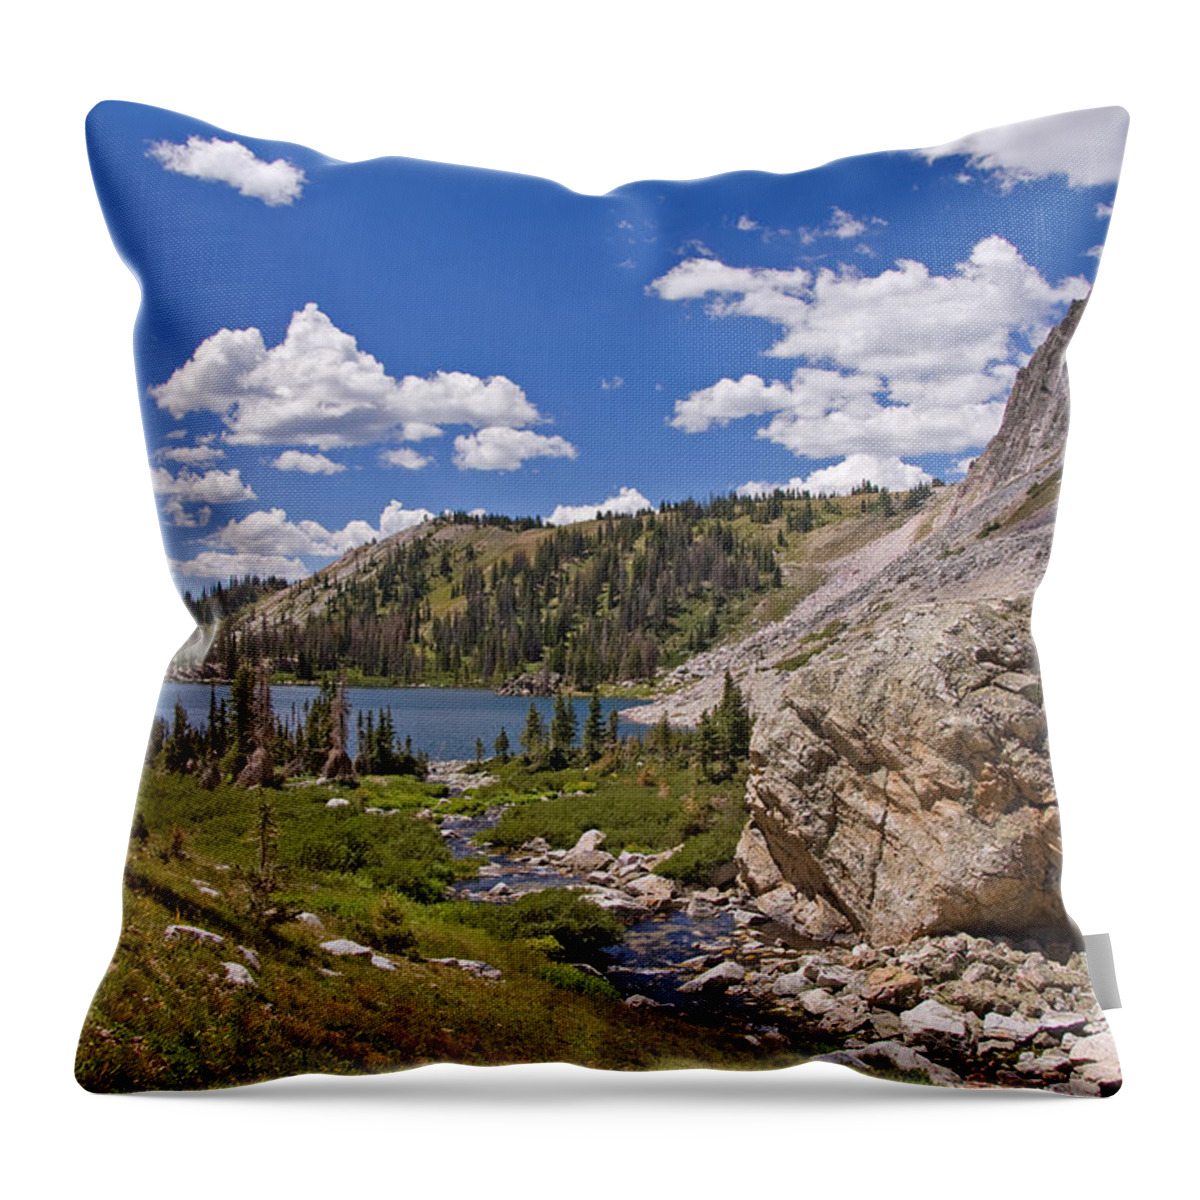 Wyoming Throw Pillow featuring the photograph Medicine Bow Mountains by Gerald DeBoer